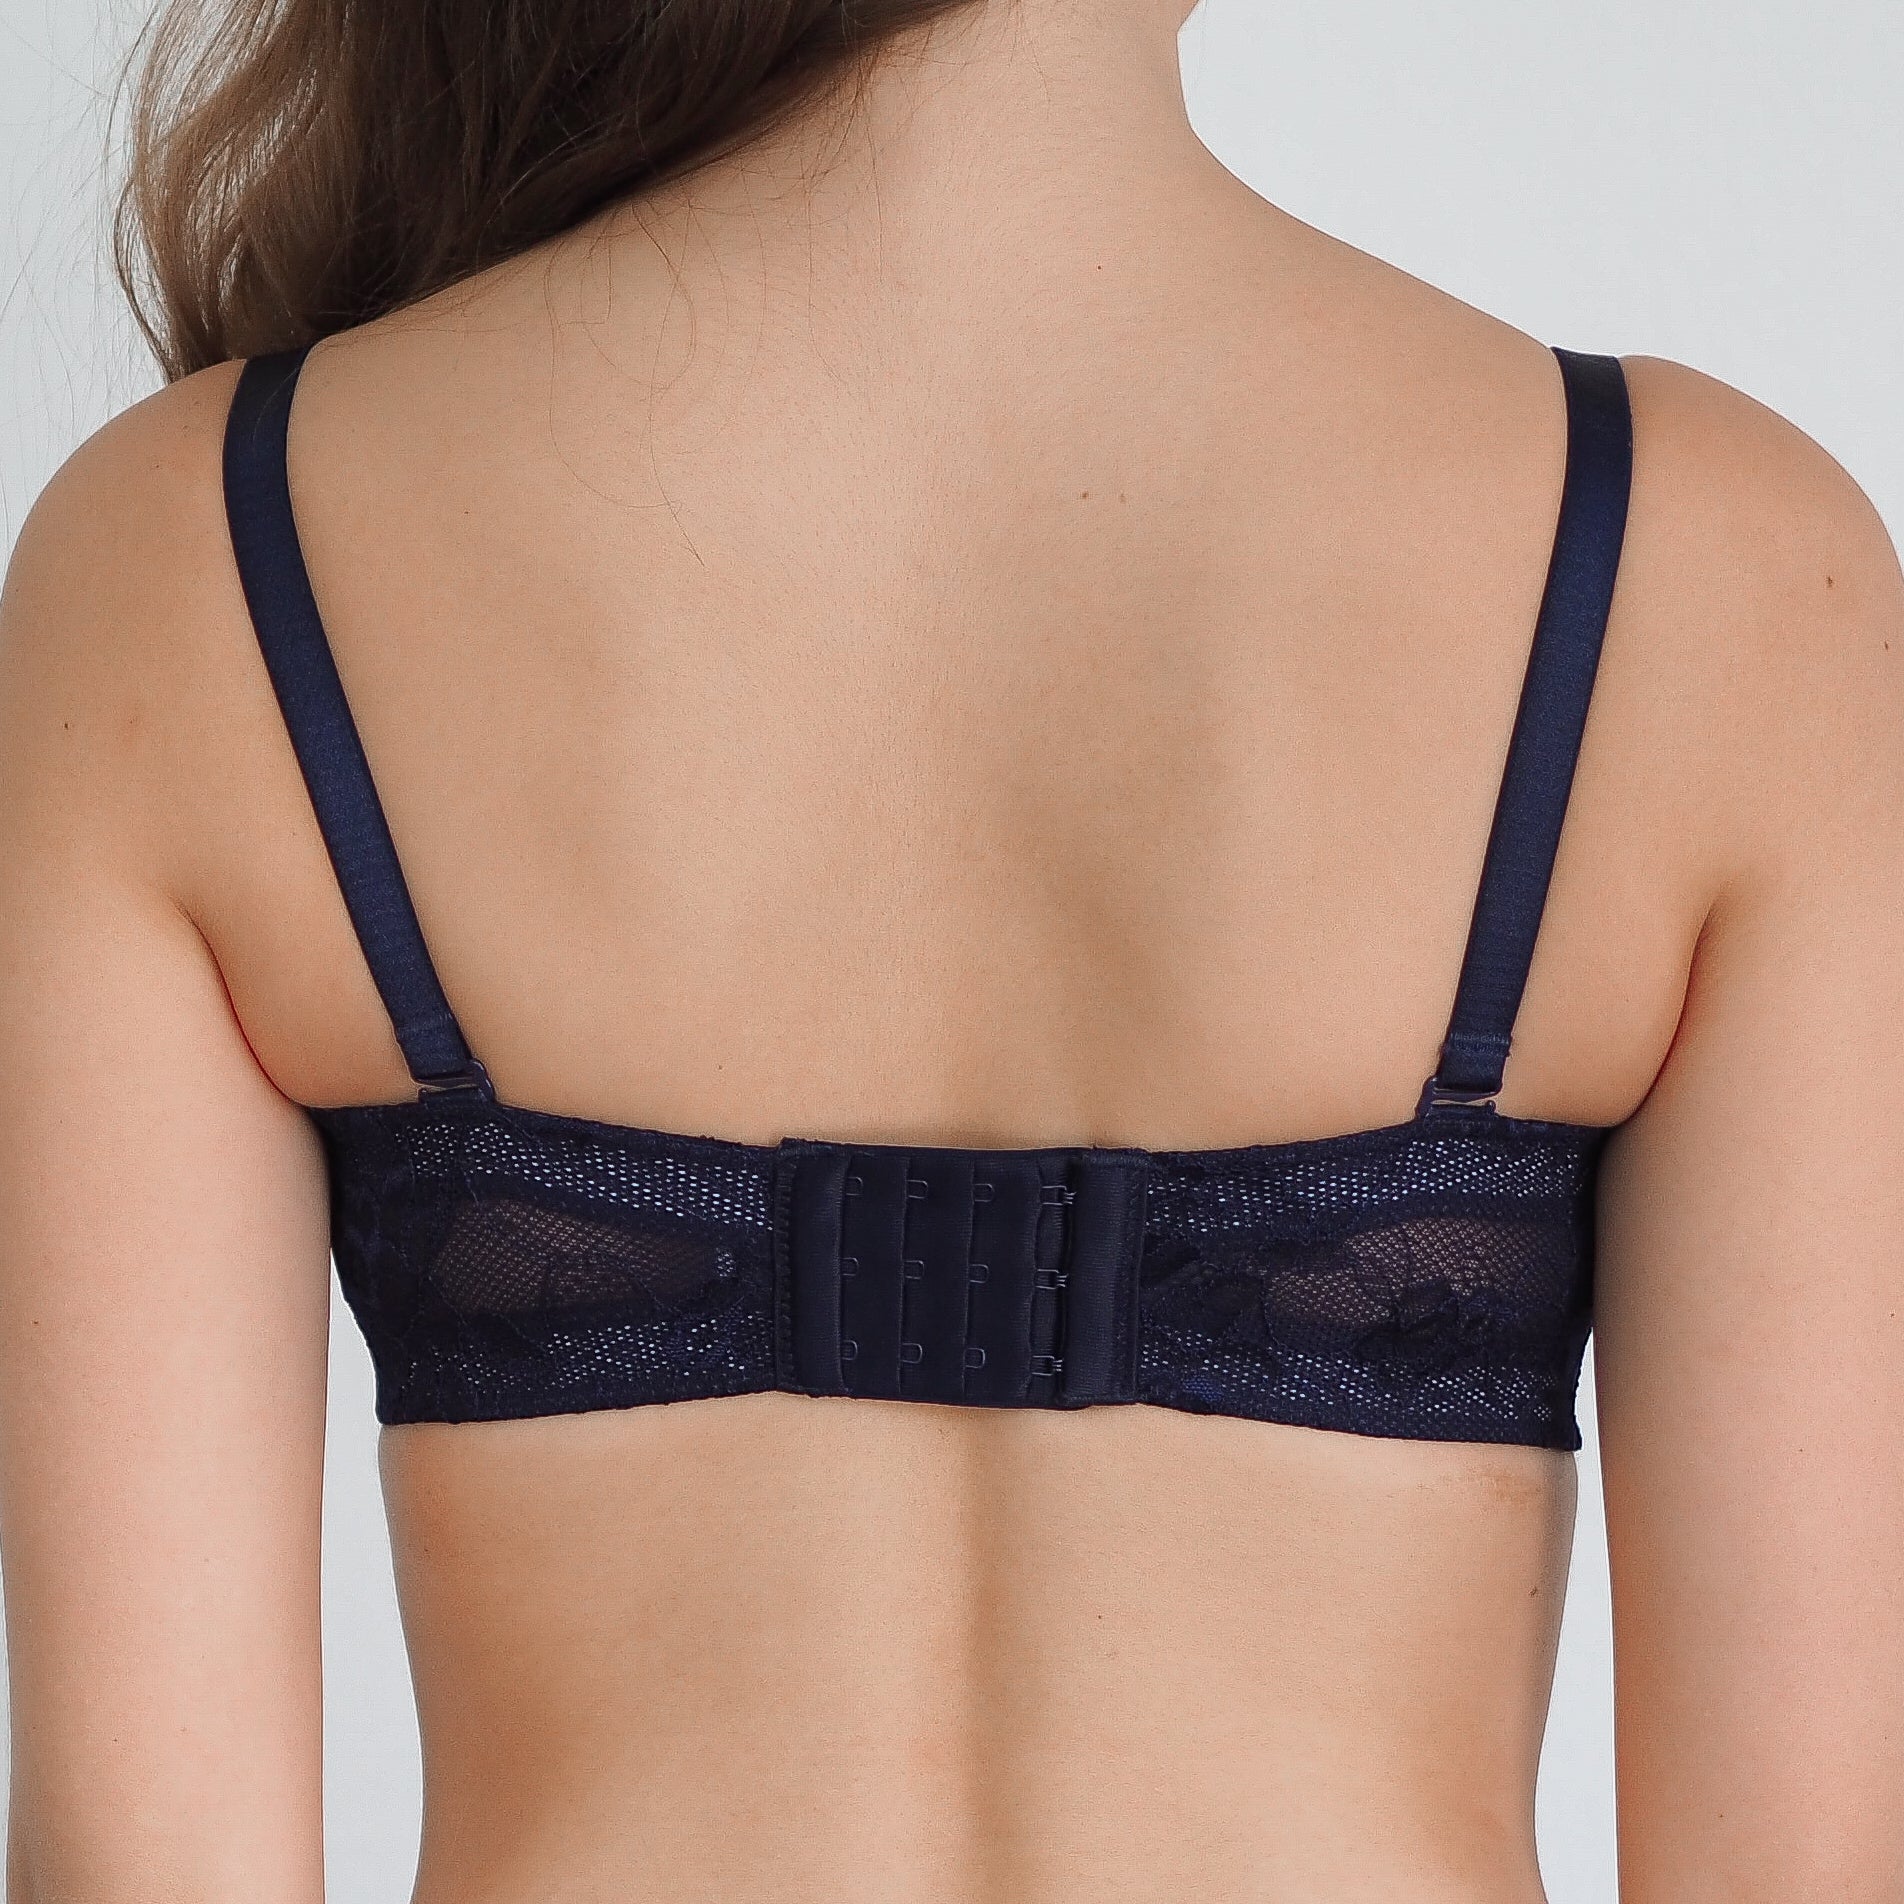 Laced It Up! Non-Slip Strapless Push Up Bra Tagged 36A/80A